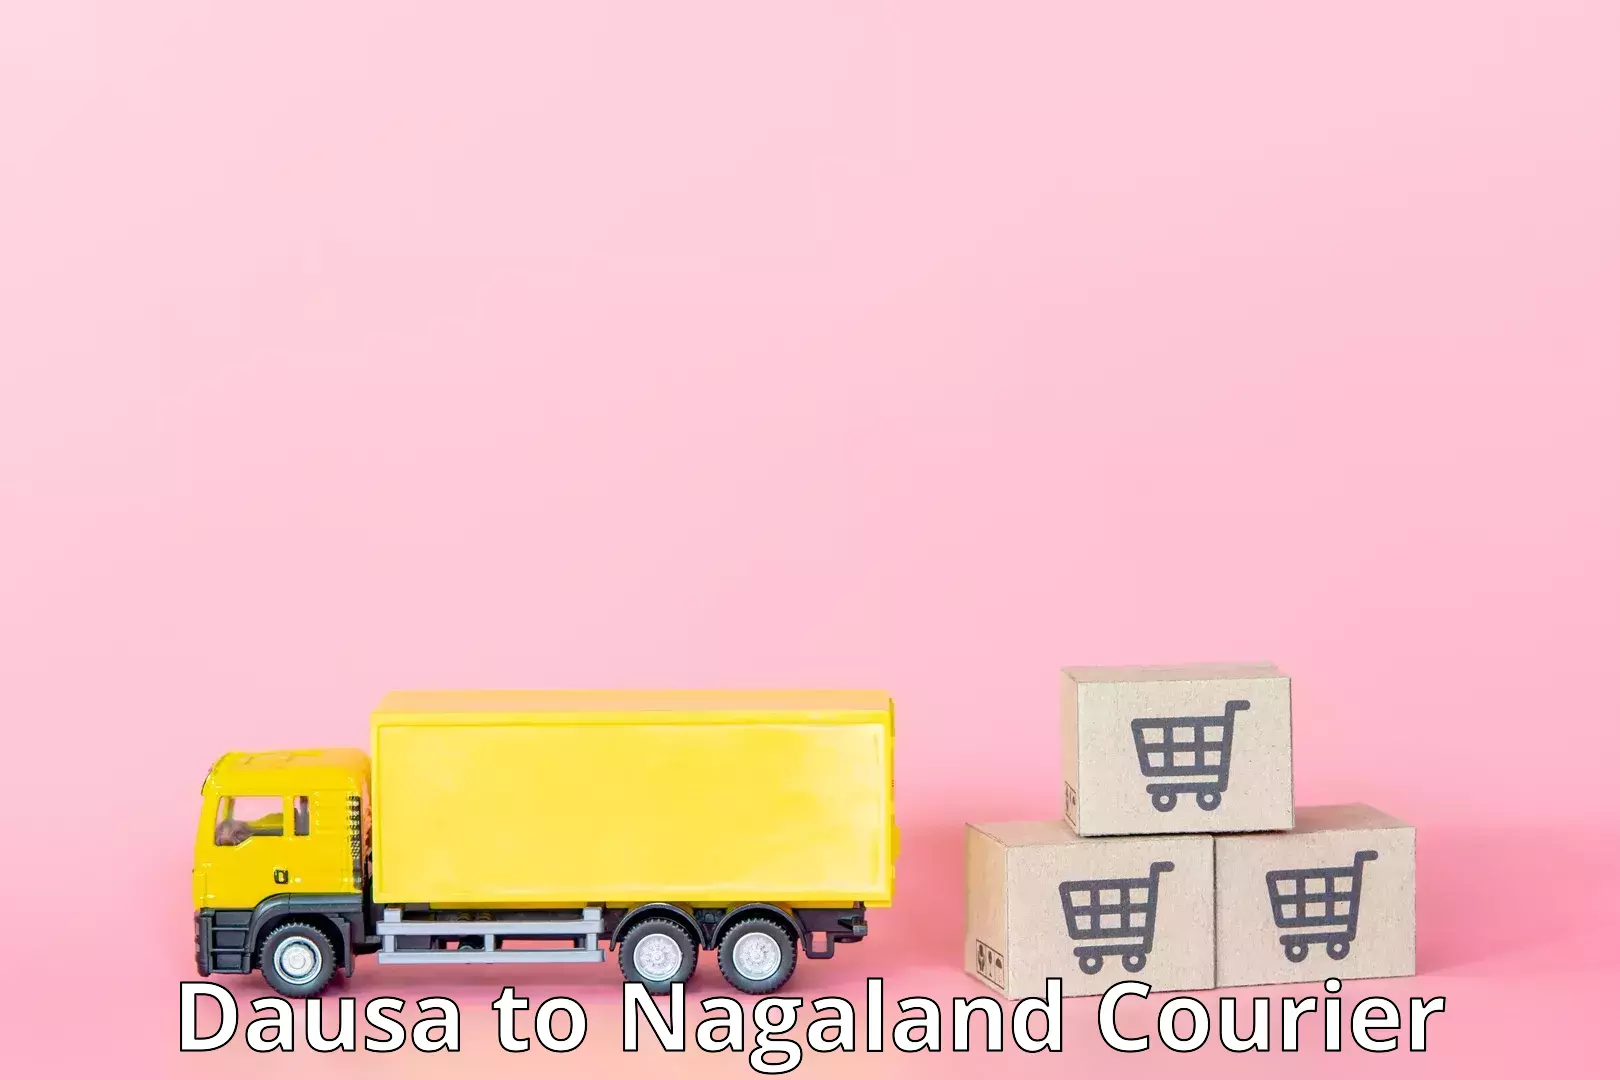 State-of-the-art courier technology Dausa to Nagaland